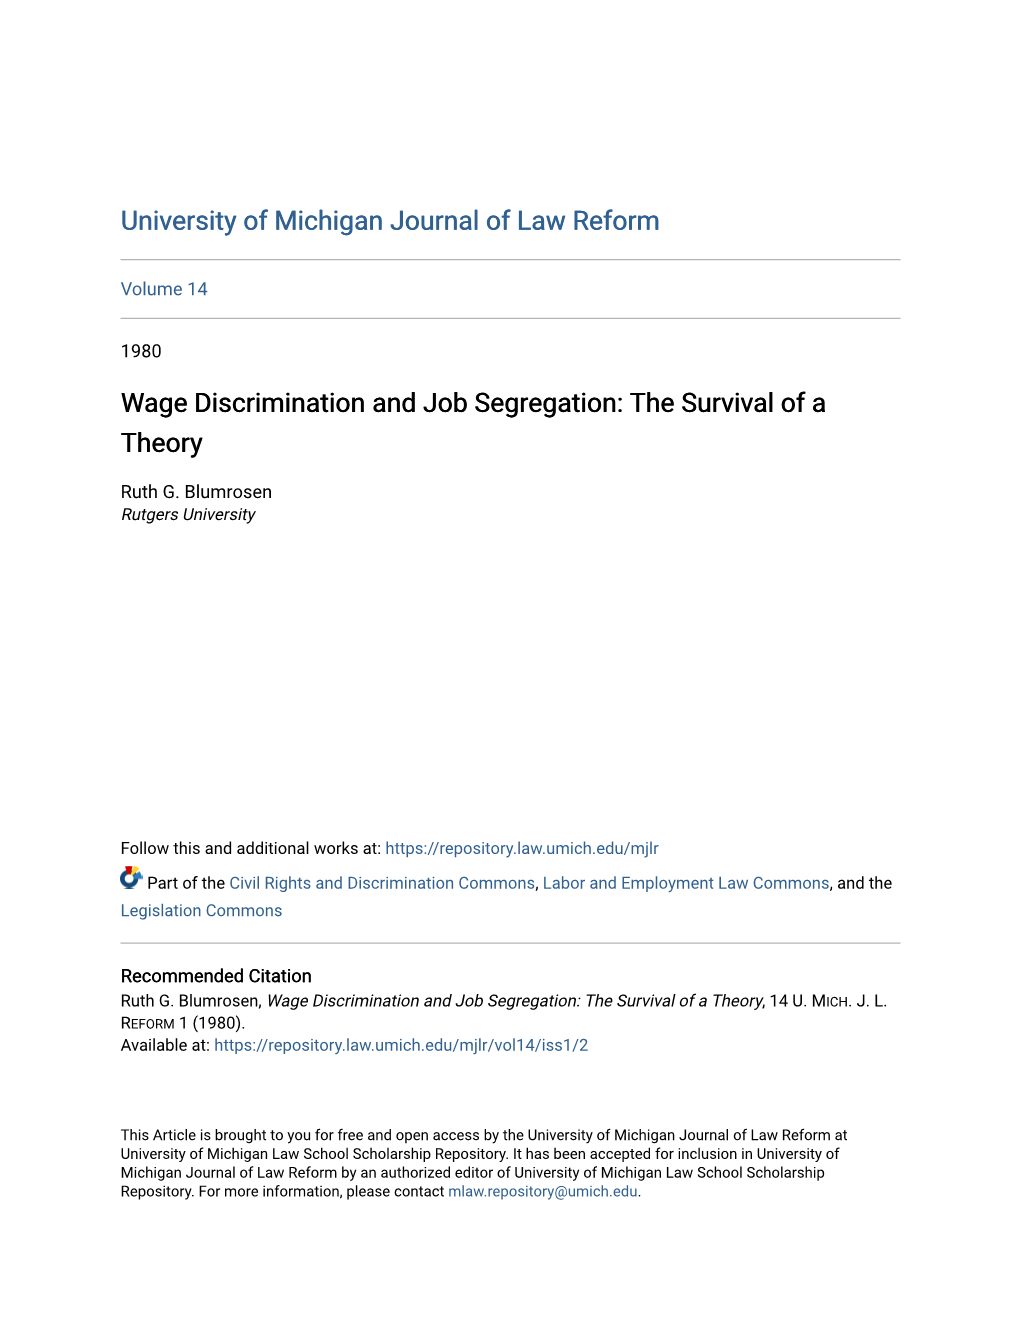 Wage Discrimination and Job Segregation: the Survival of a Theory